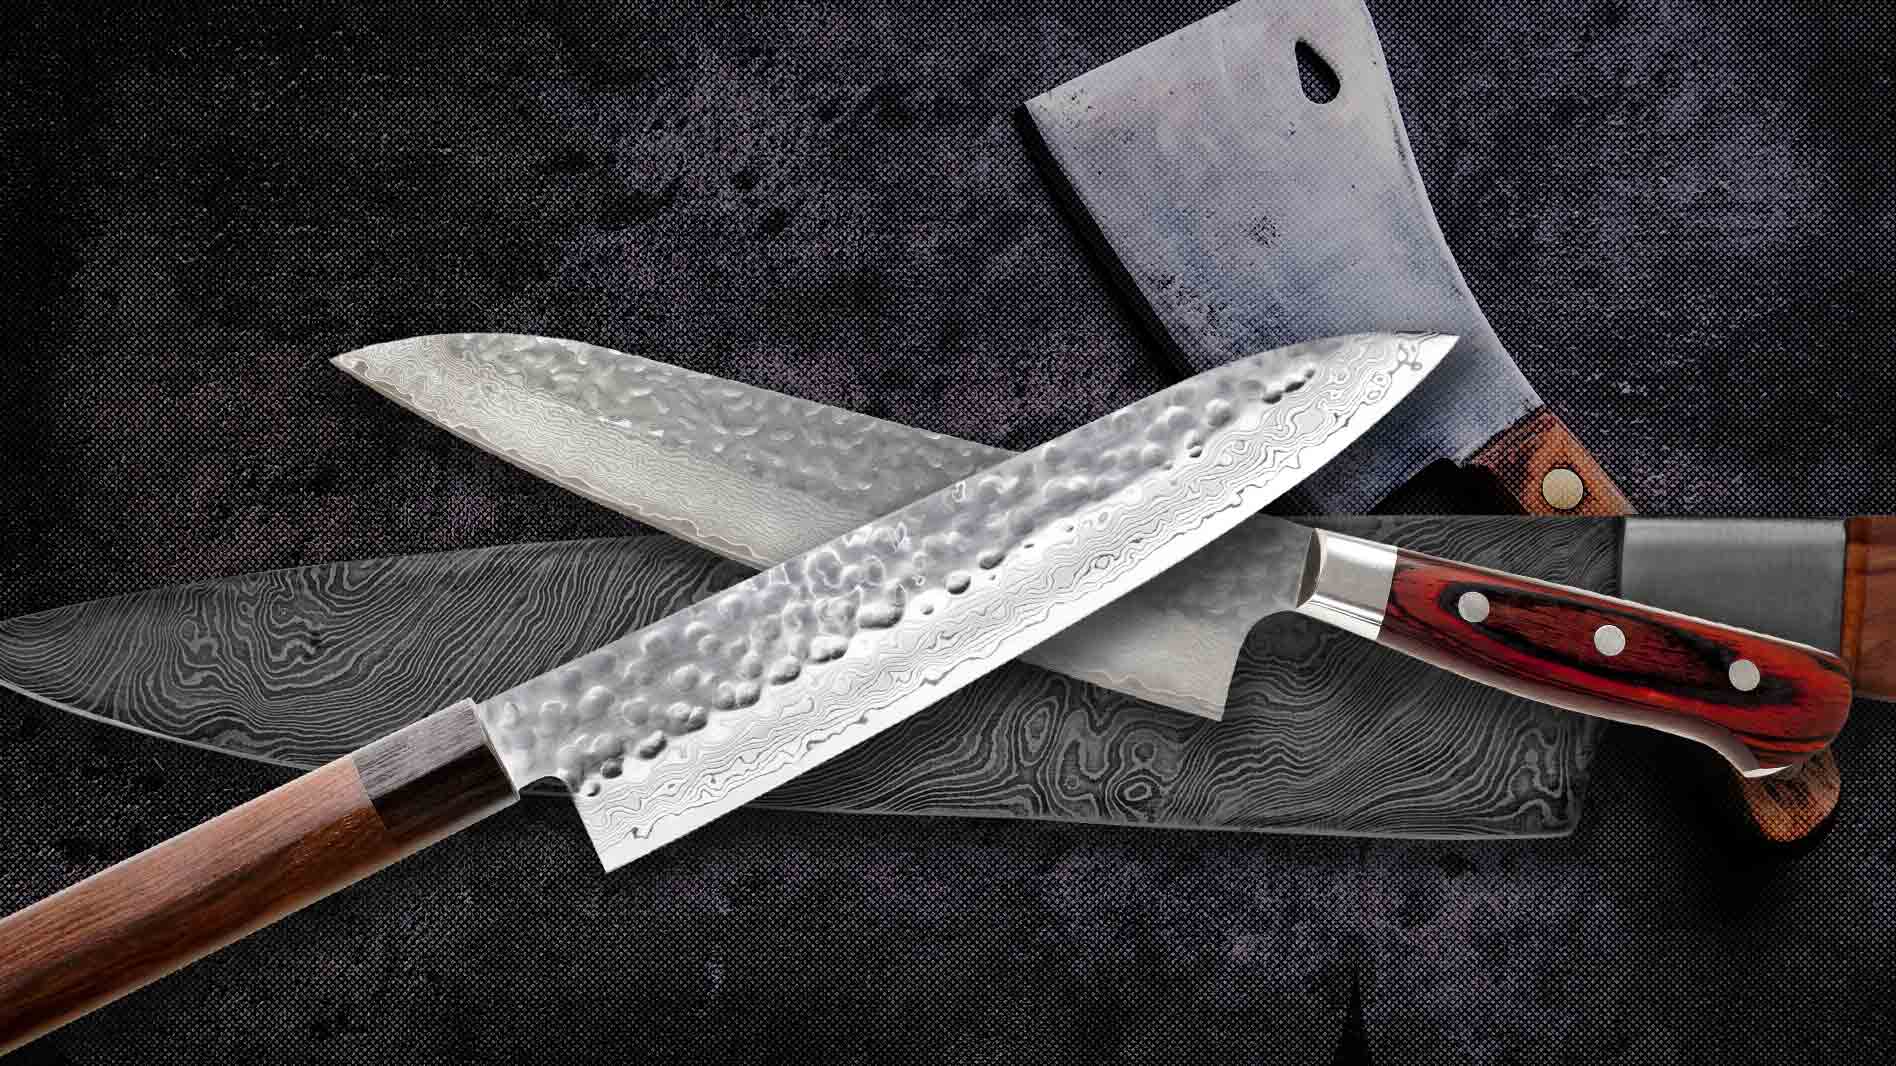 Knife experts reveal what you need to consider when buying a new knife